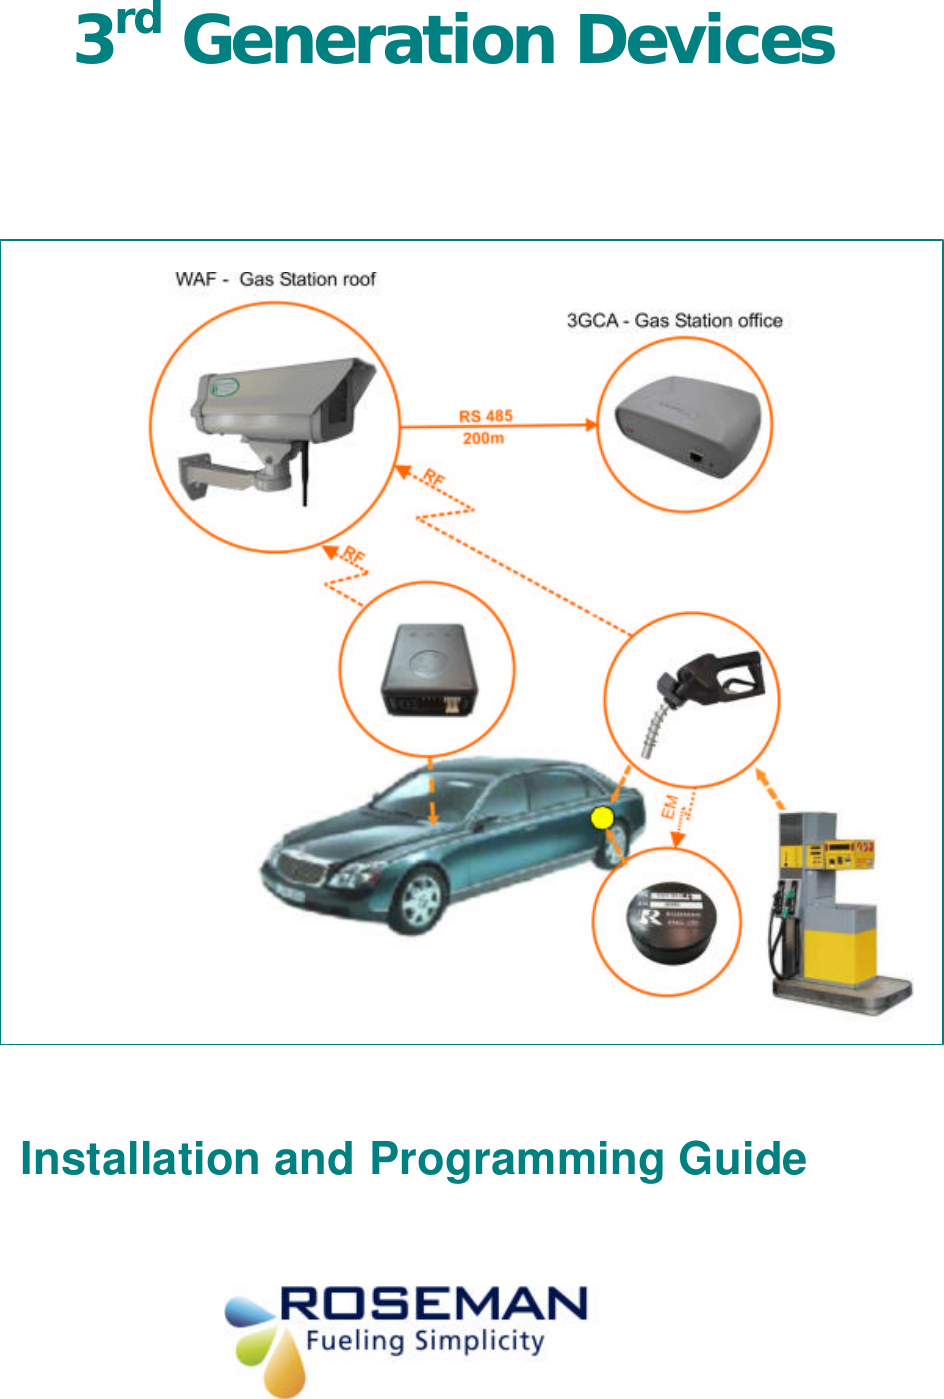  3rd Generation Devices                       Installation and Programming Guide    